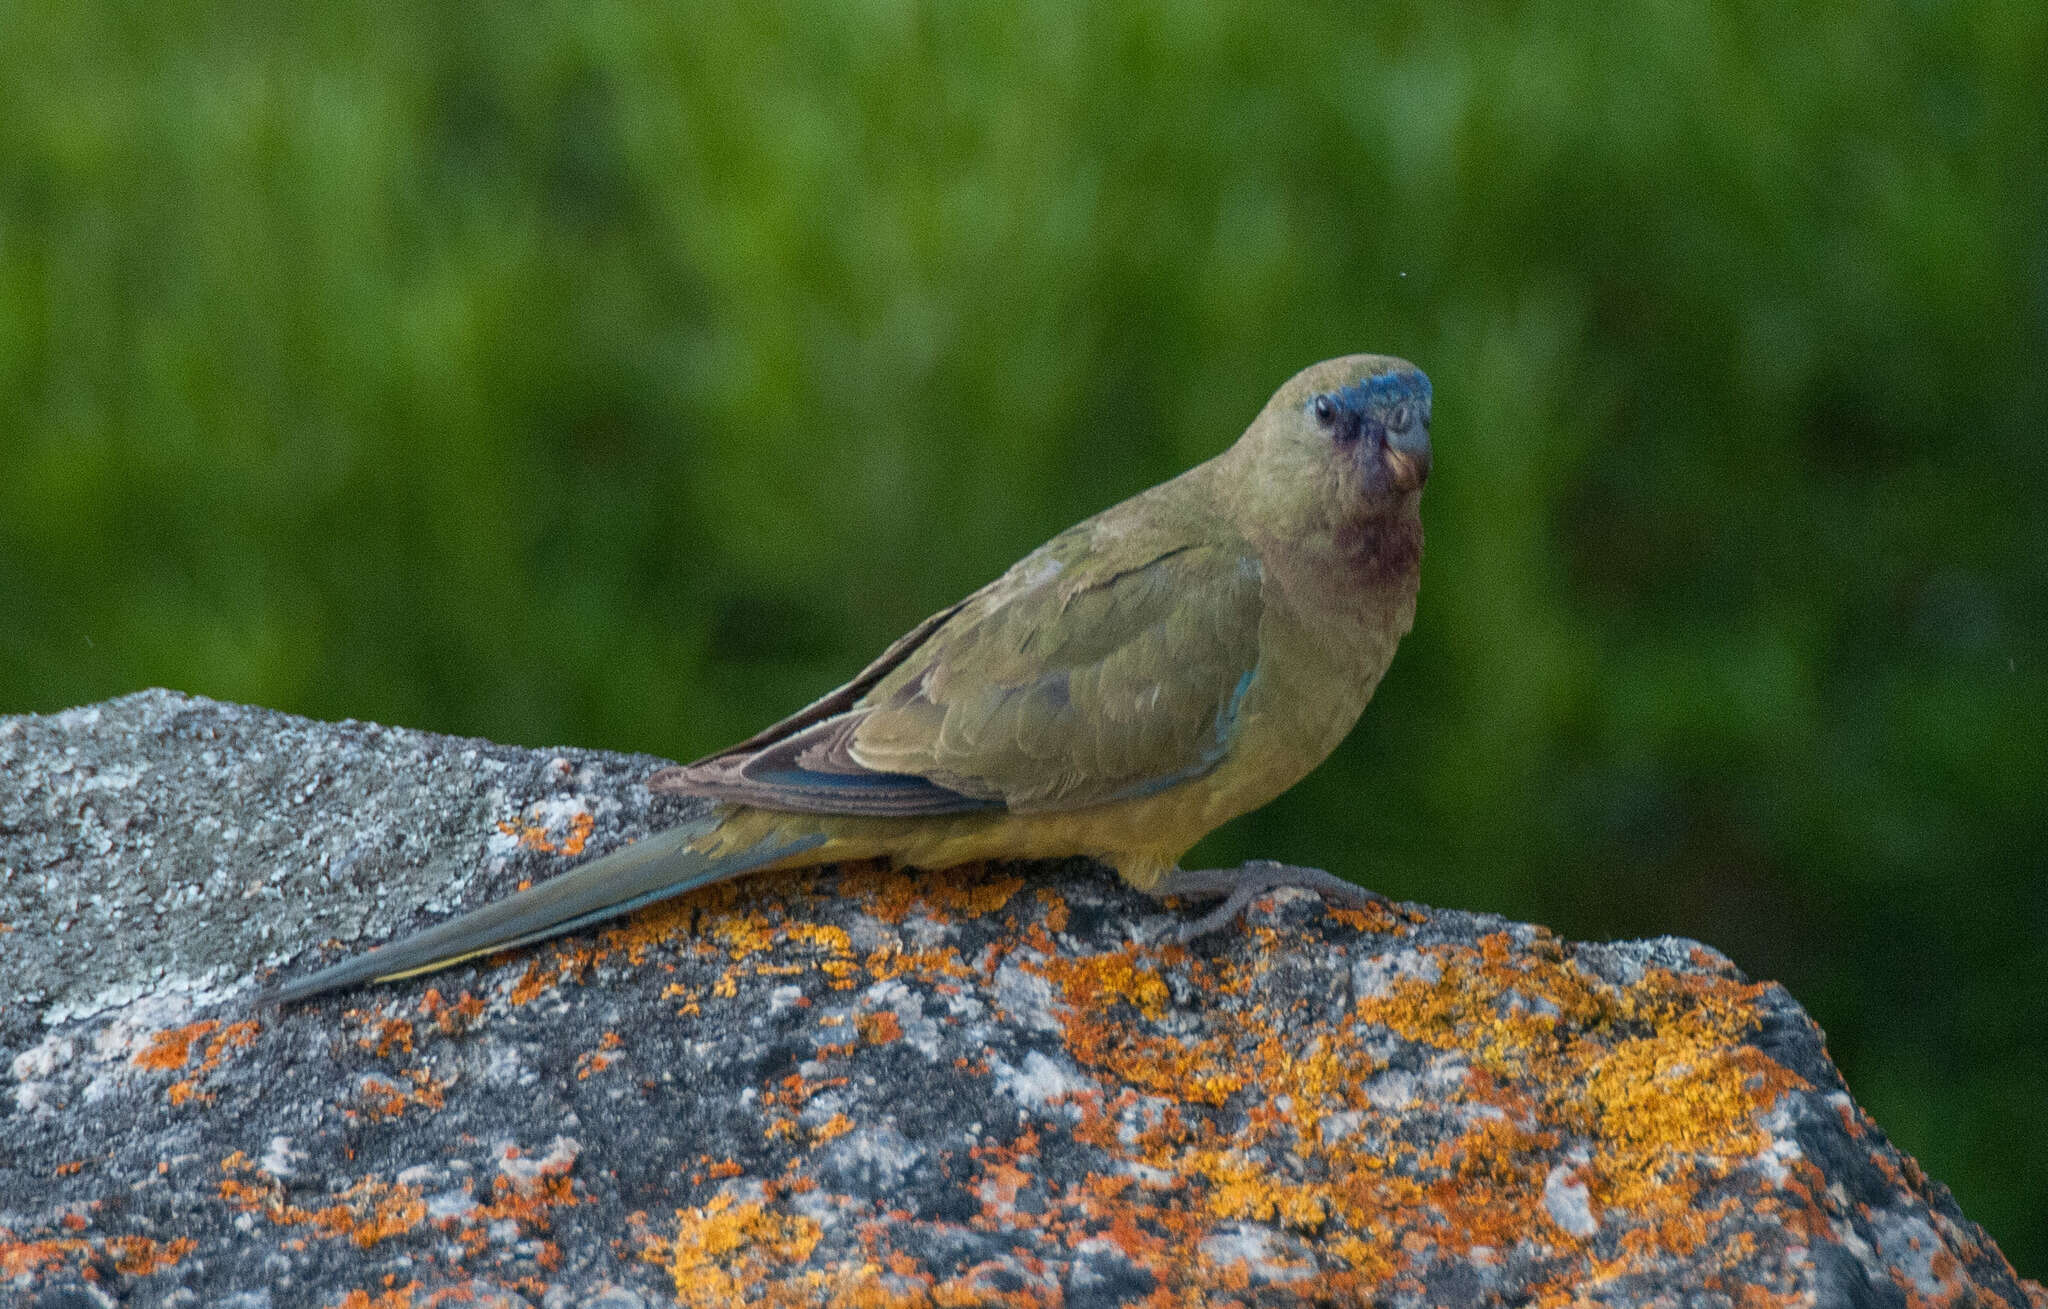 Image of Rock Parrot